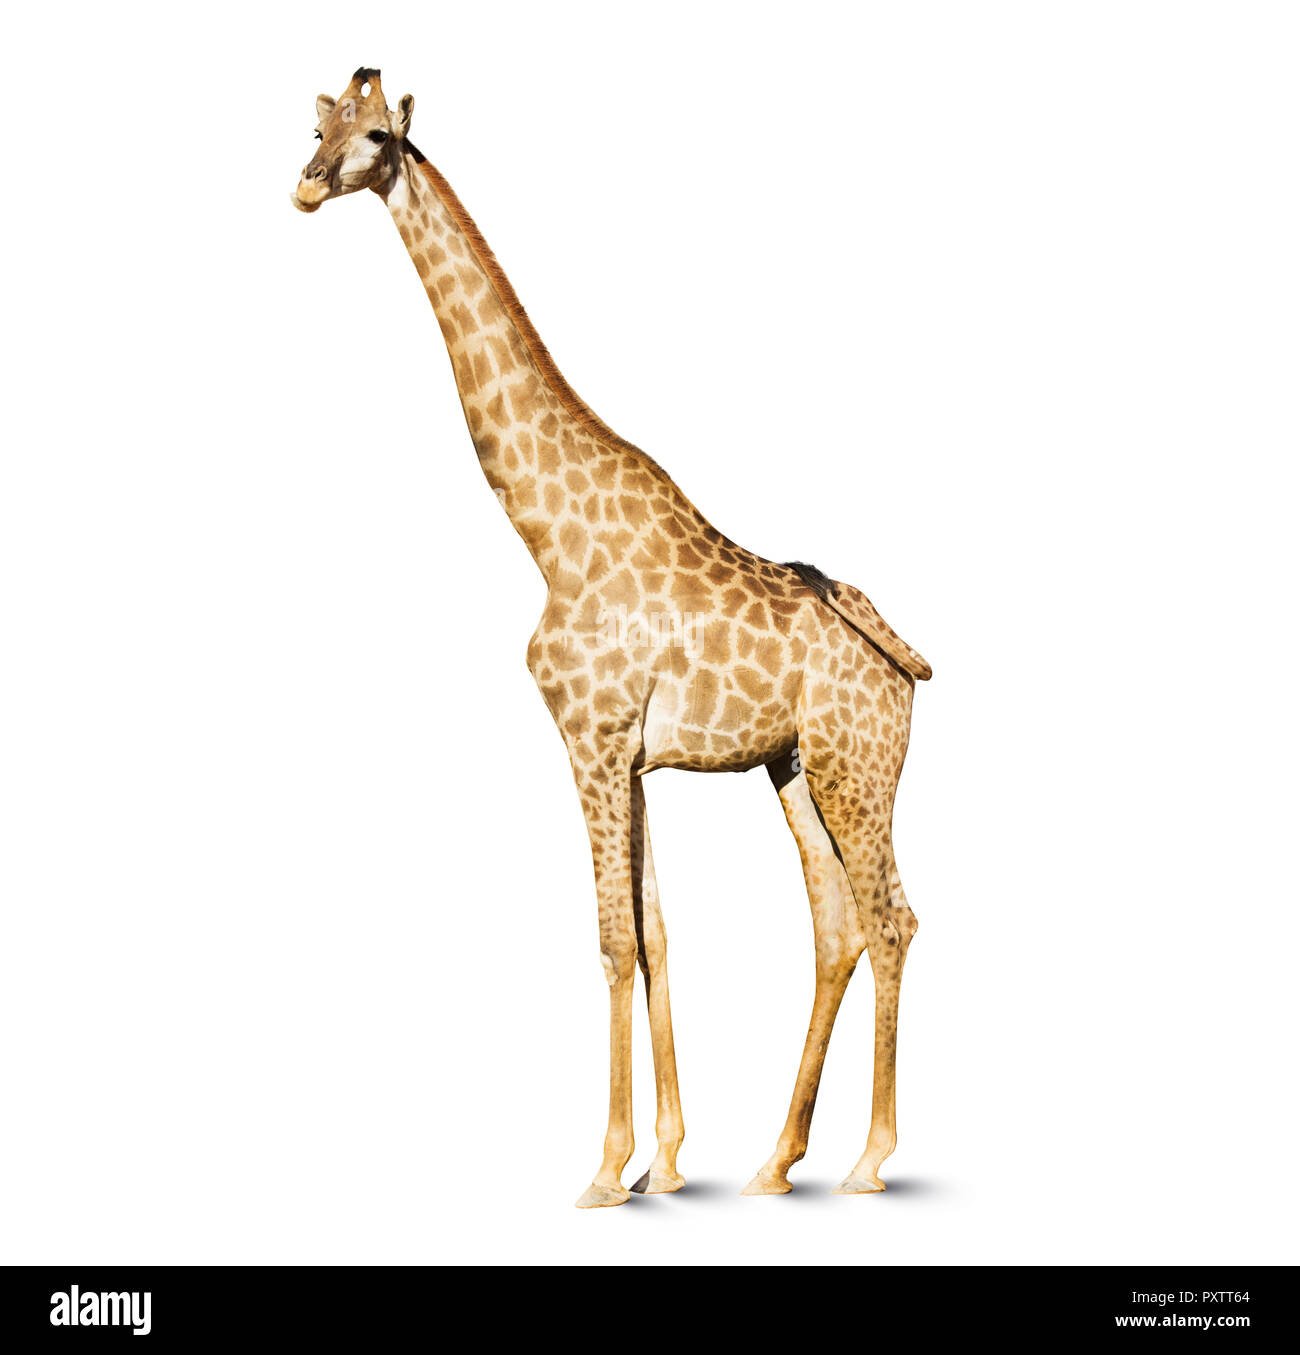 giraffe head isolated on white background, a large African mammal with a very long neck and forelegs, having a coat patterned with brown patches separ Stock Photo